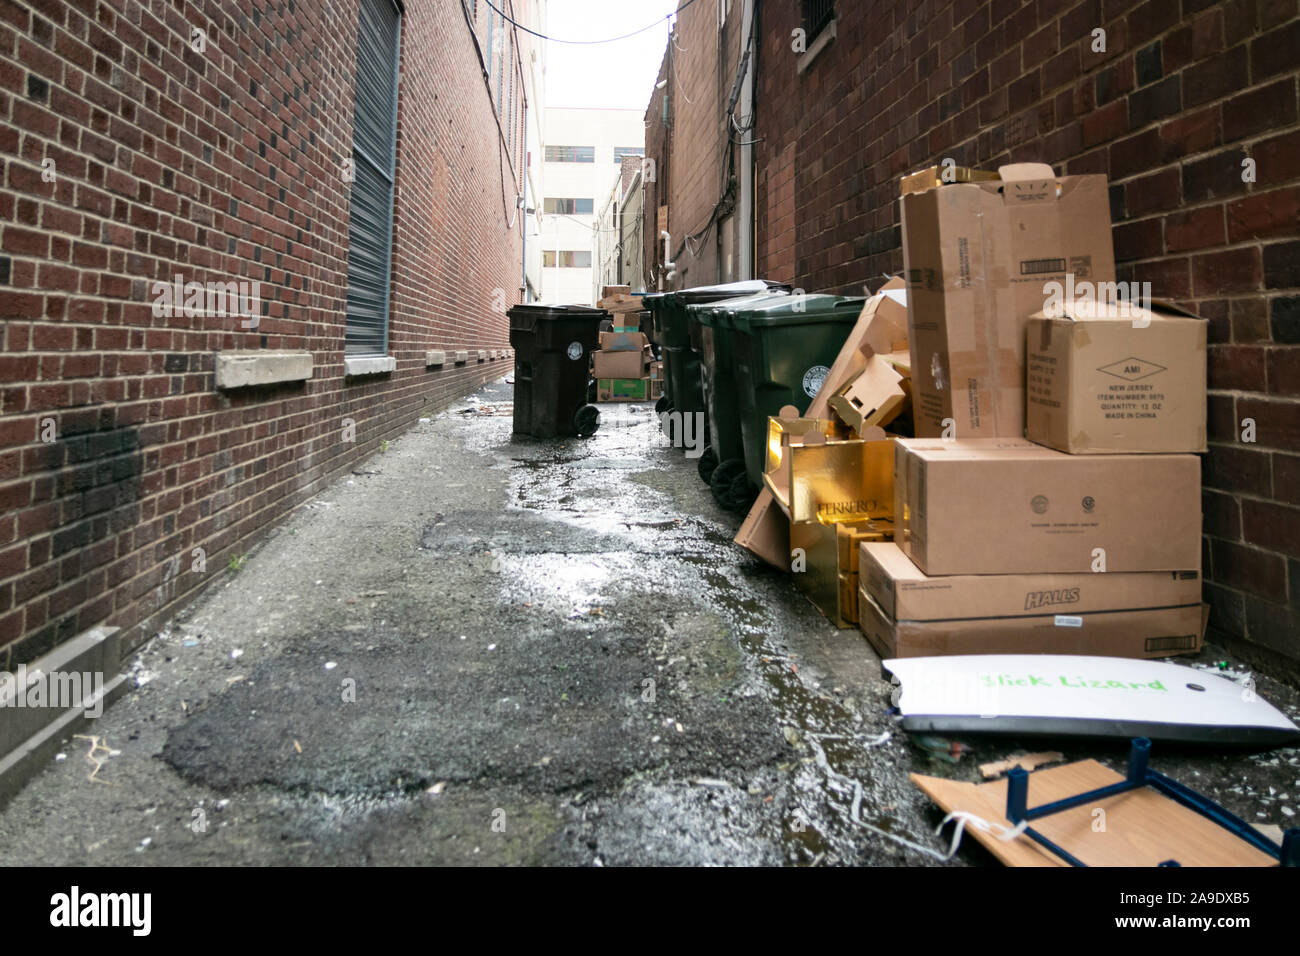 Garbage cans and recycling bins in a city alley with cardboard boxes and trash Stock Photo